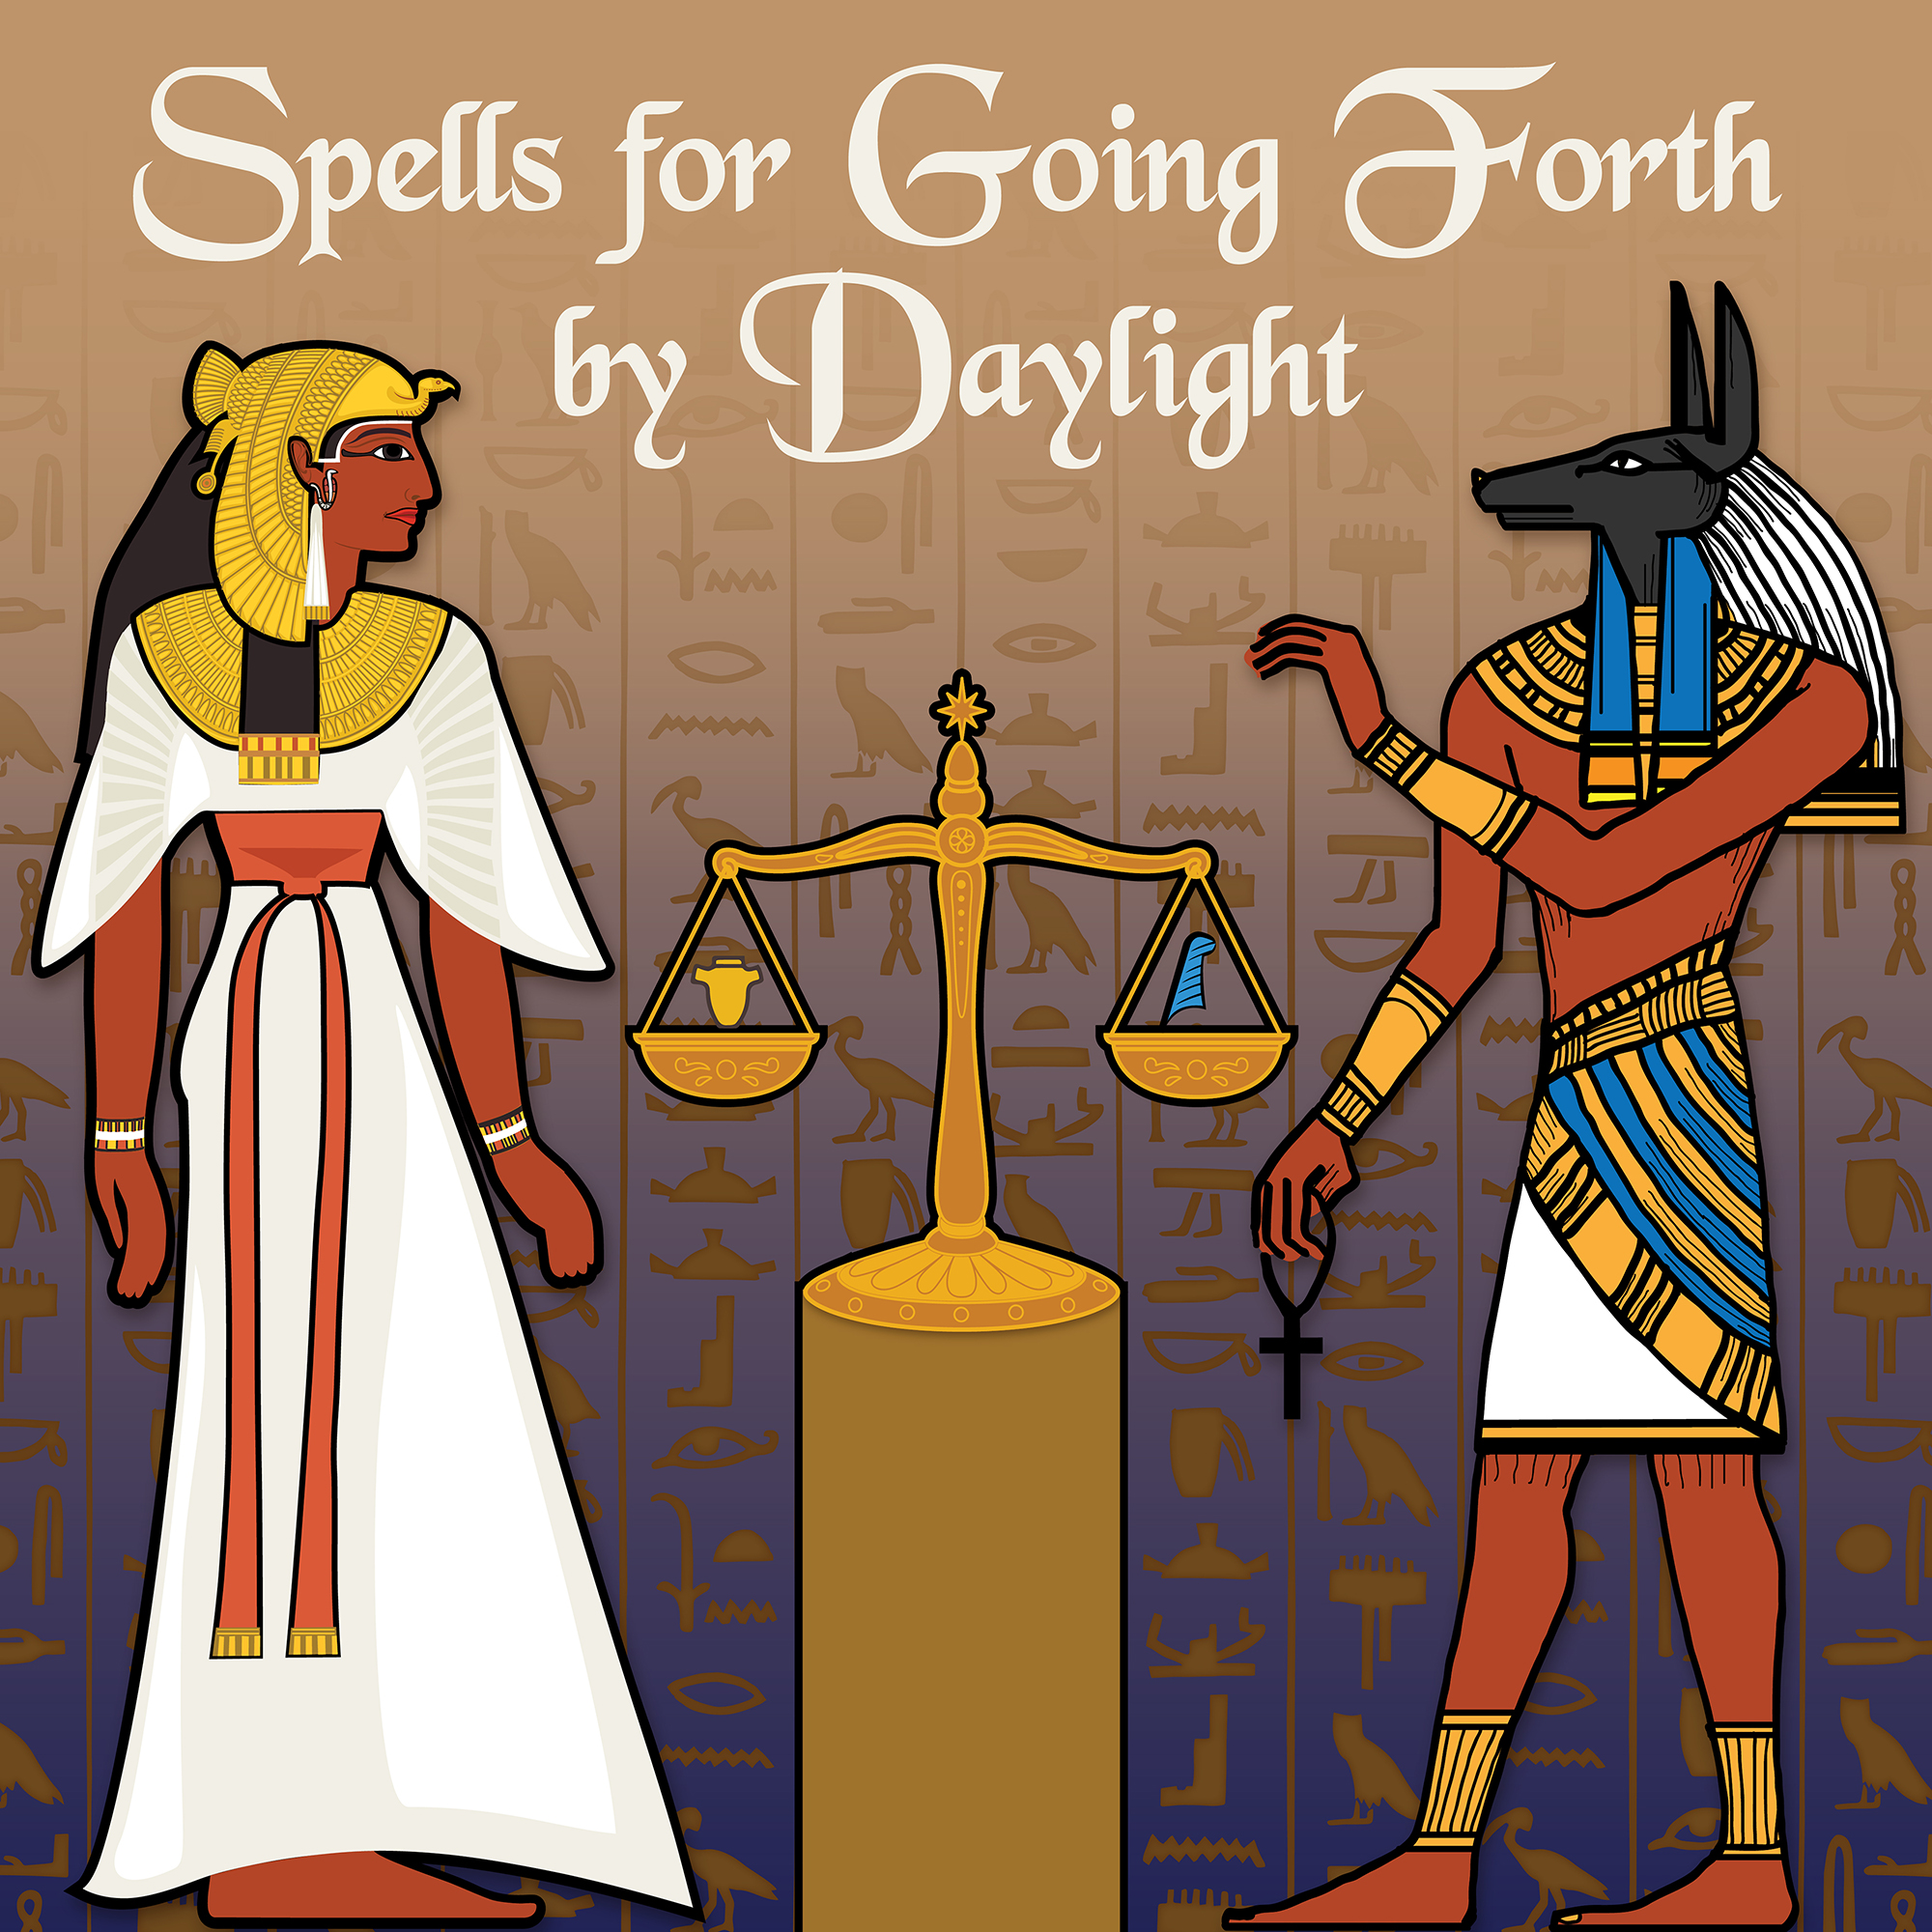 Spells for Going Forth by Daylight by Leigh M. Marshall directed by Josh Turner